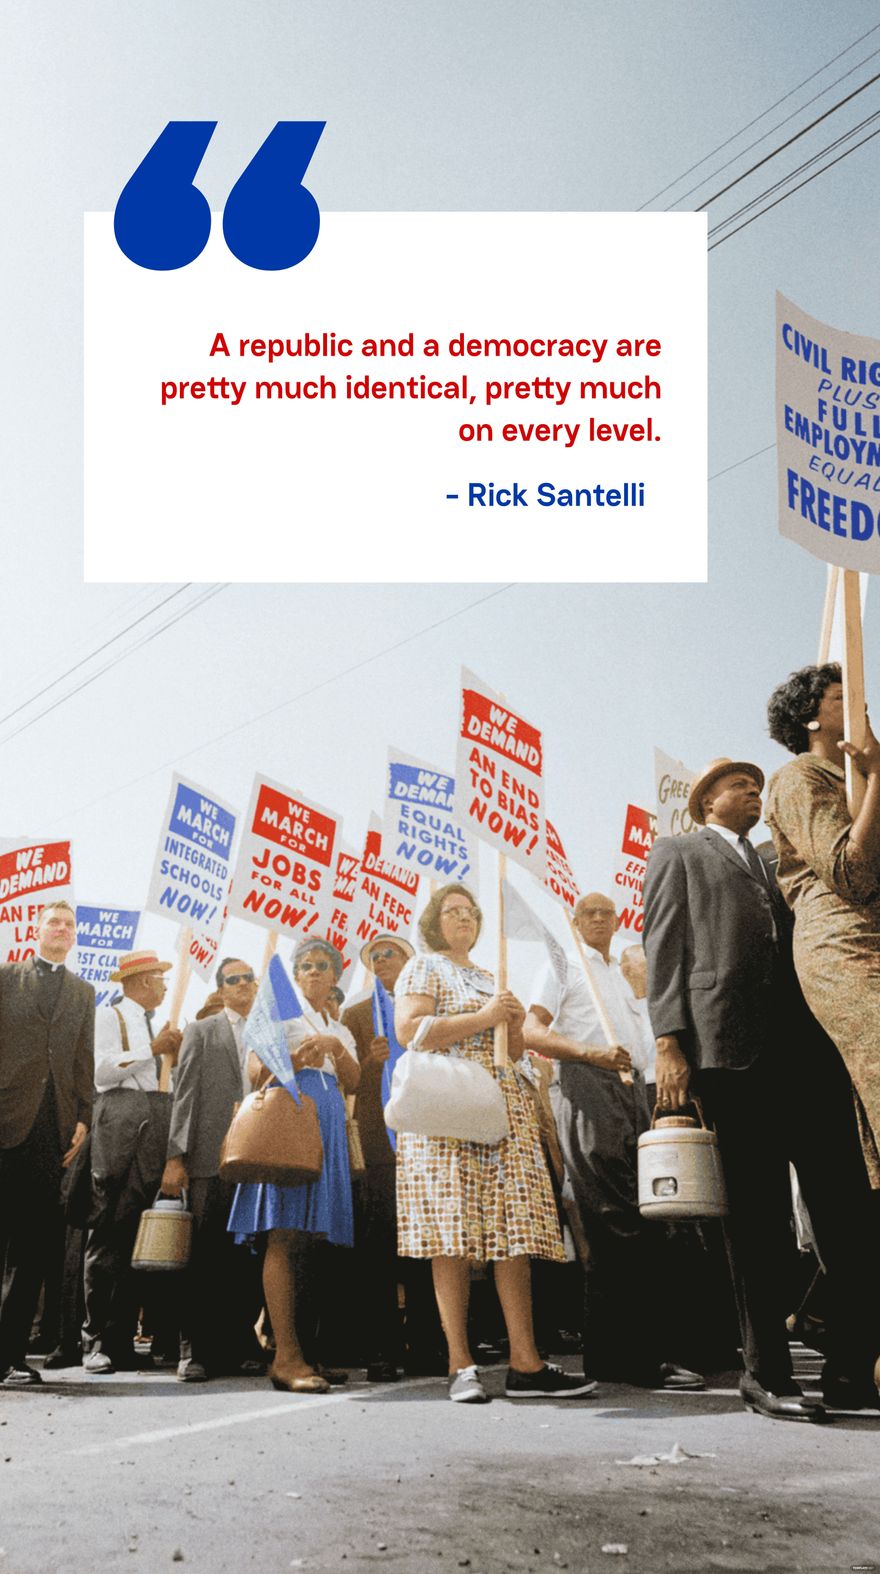 Free A republic and a democracy are pretty much identical, pretty much on every level. - Rick Santelli